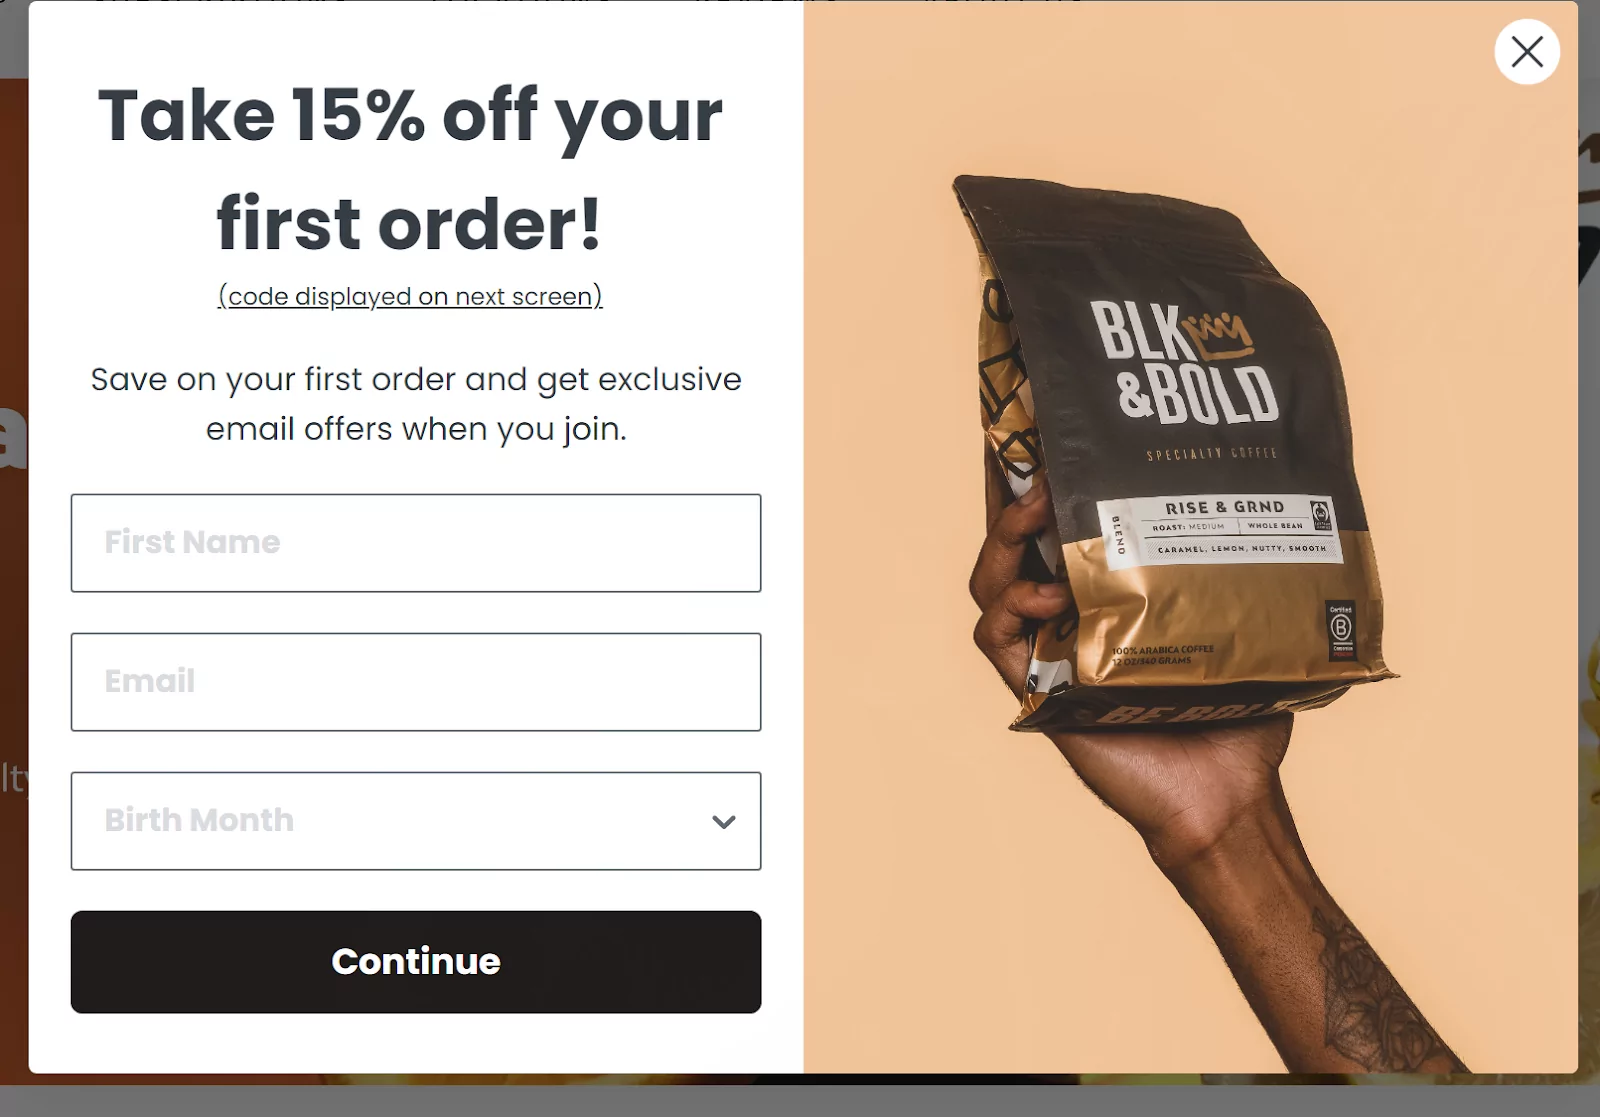 Blkandbold offering 15% off on the first order and in return taking basic information.